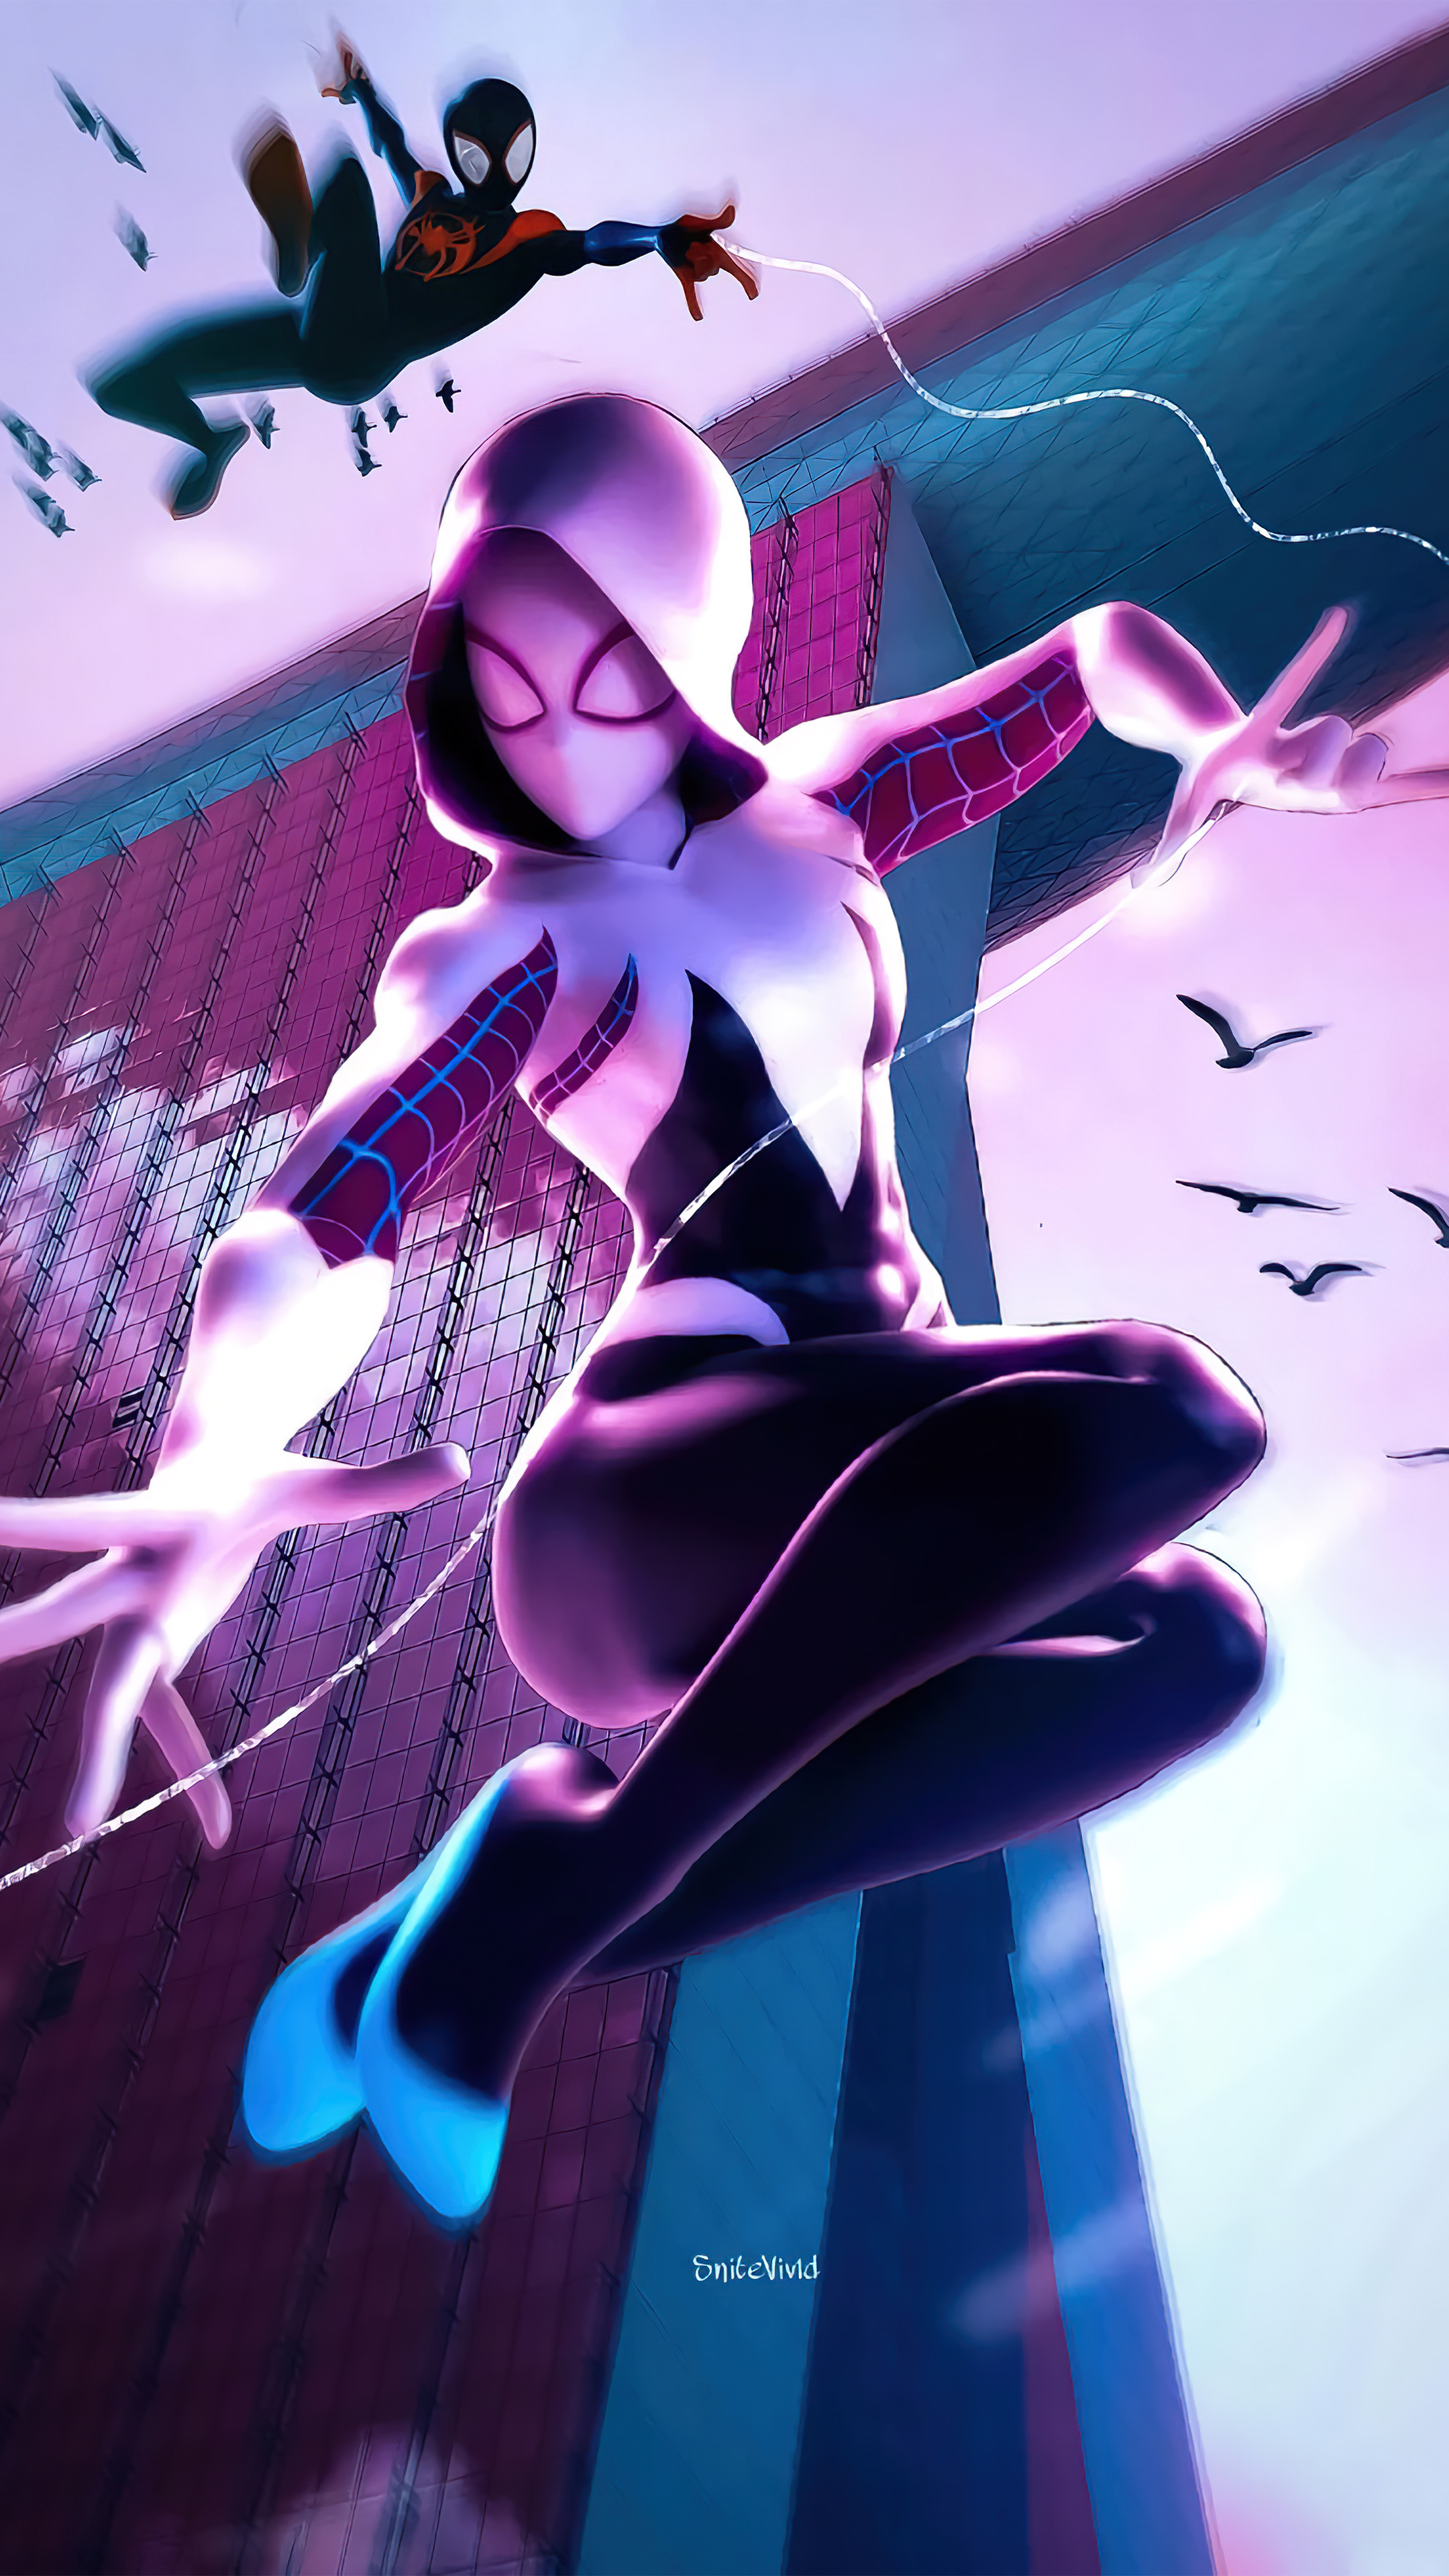 Gwen Stacy and Spider-Man, Sony Xperia wallpapers, High quality images, Captivating scenes, 2160x3840 4K Phone